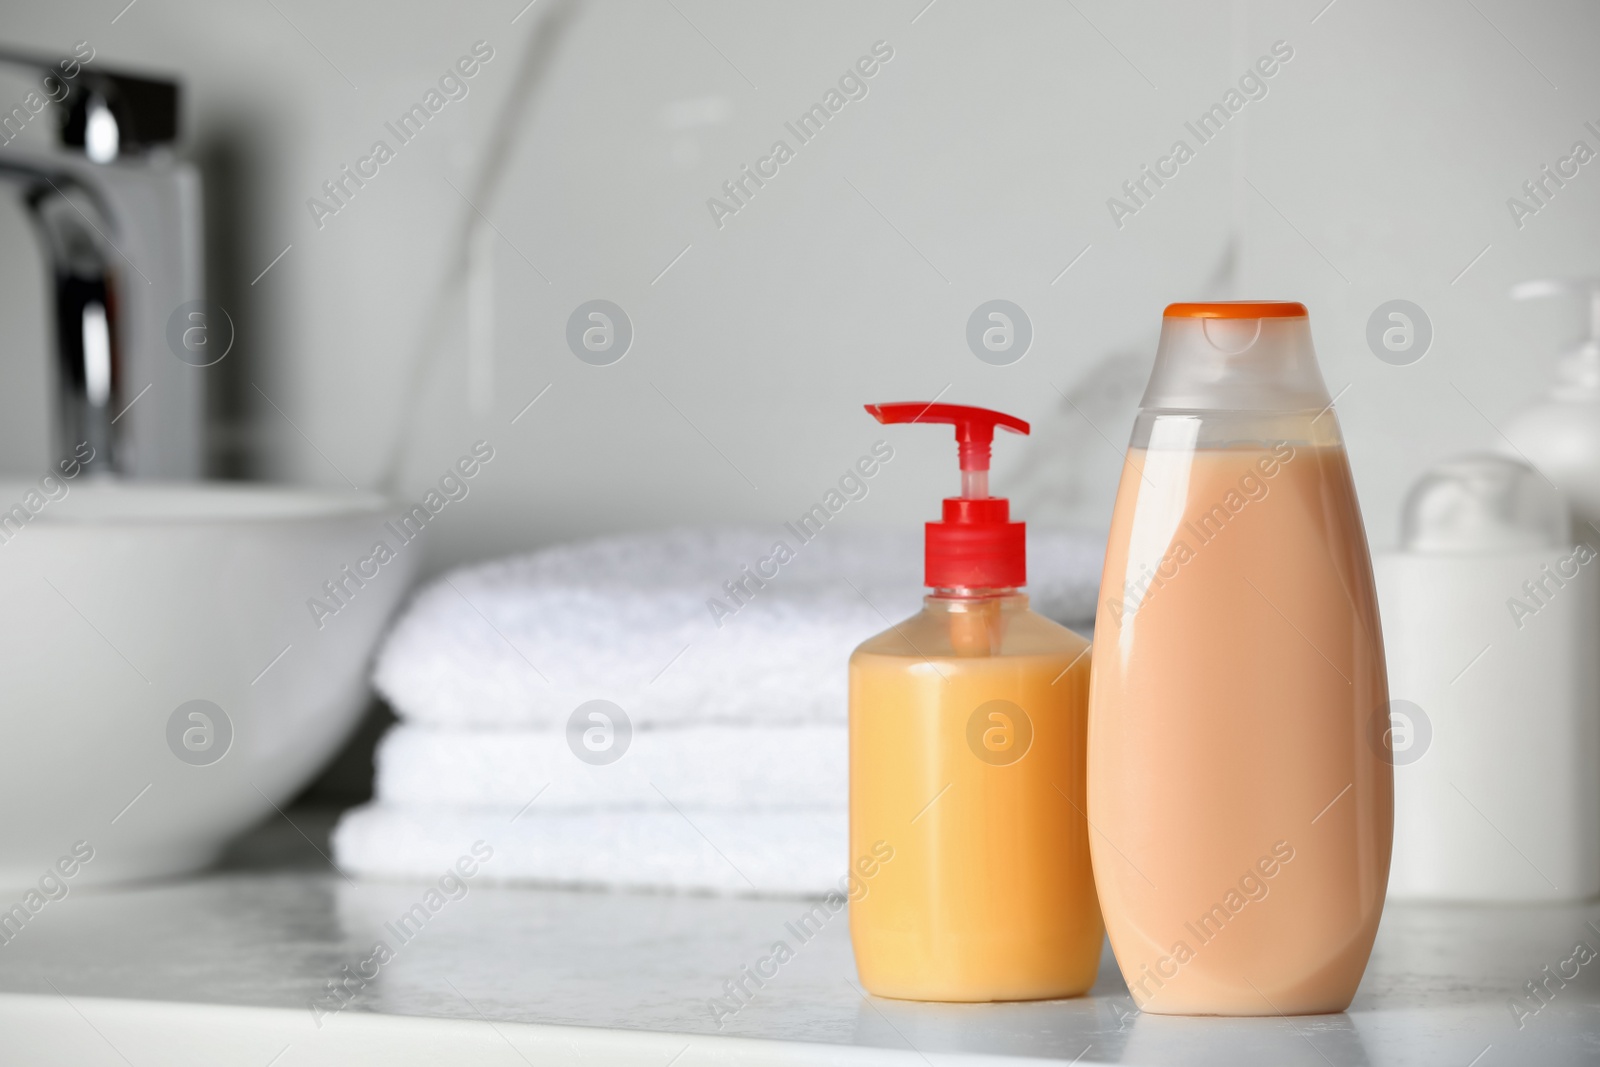 Photo of Shampoo and liquid soap near sink on bathroom counter, space for text